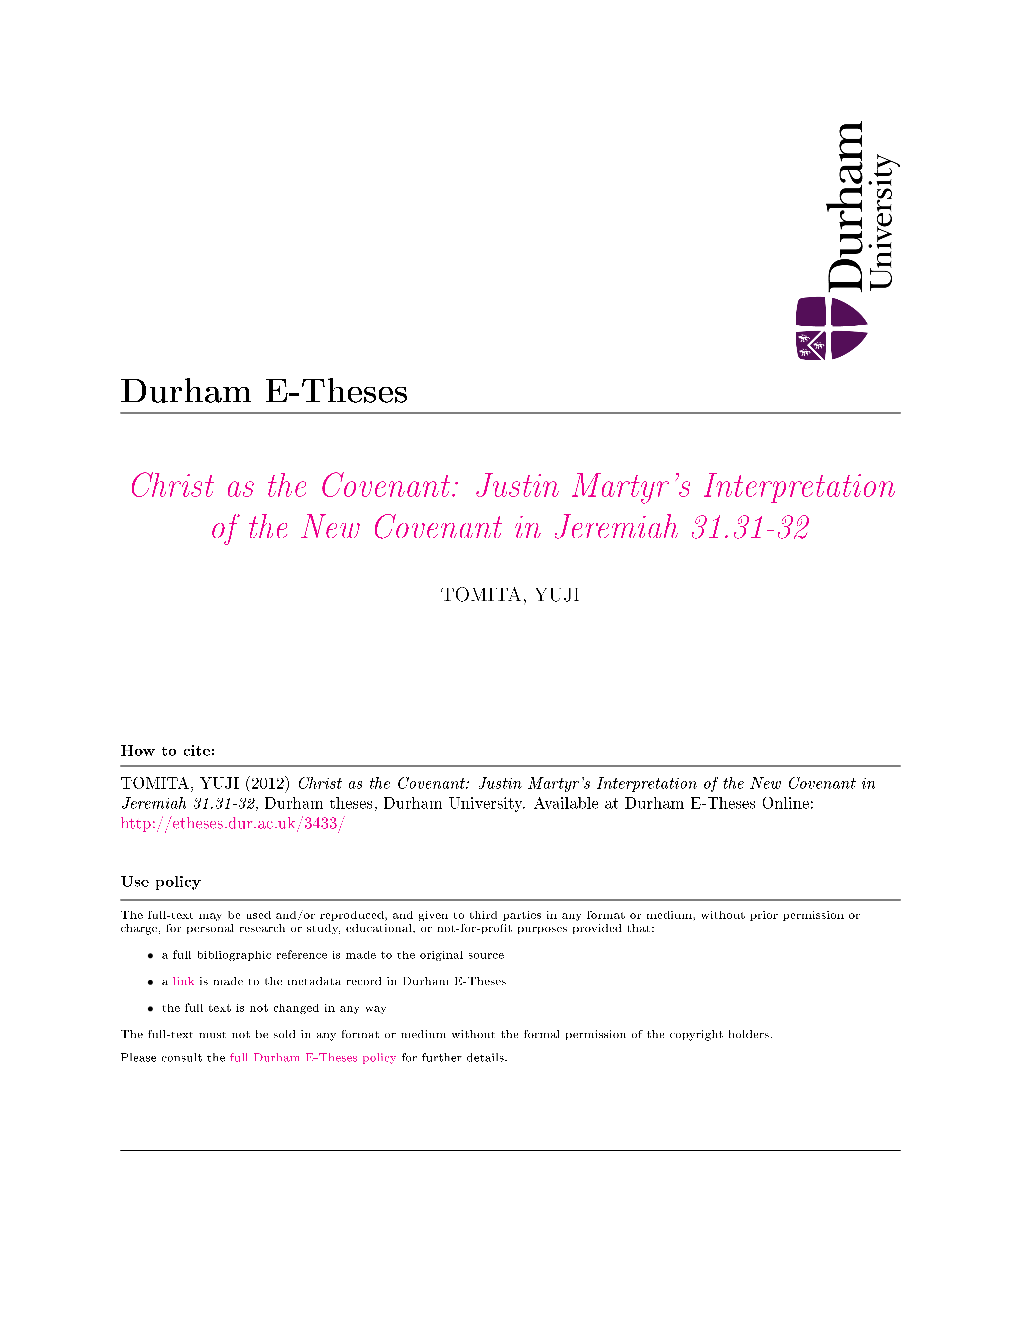 Christ As the Covenant: Justin Martyr's Interpretation of the New Covenant in Jeremiah 31.31-32